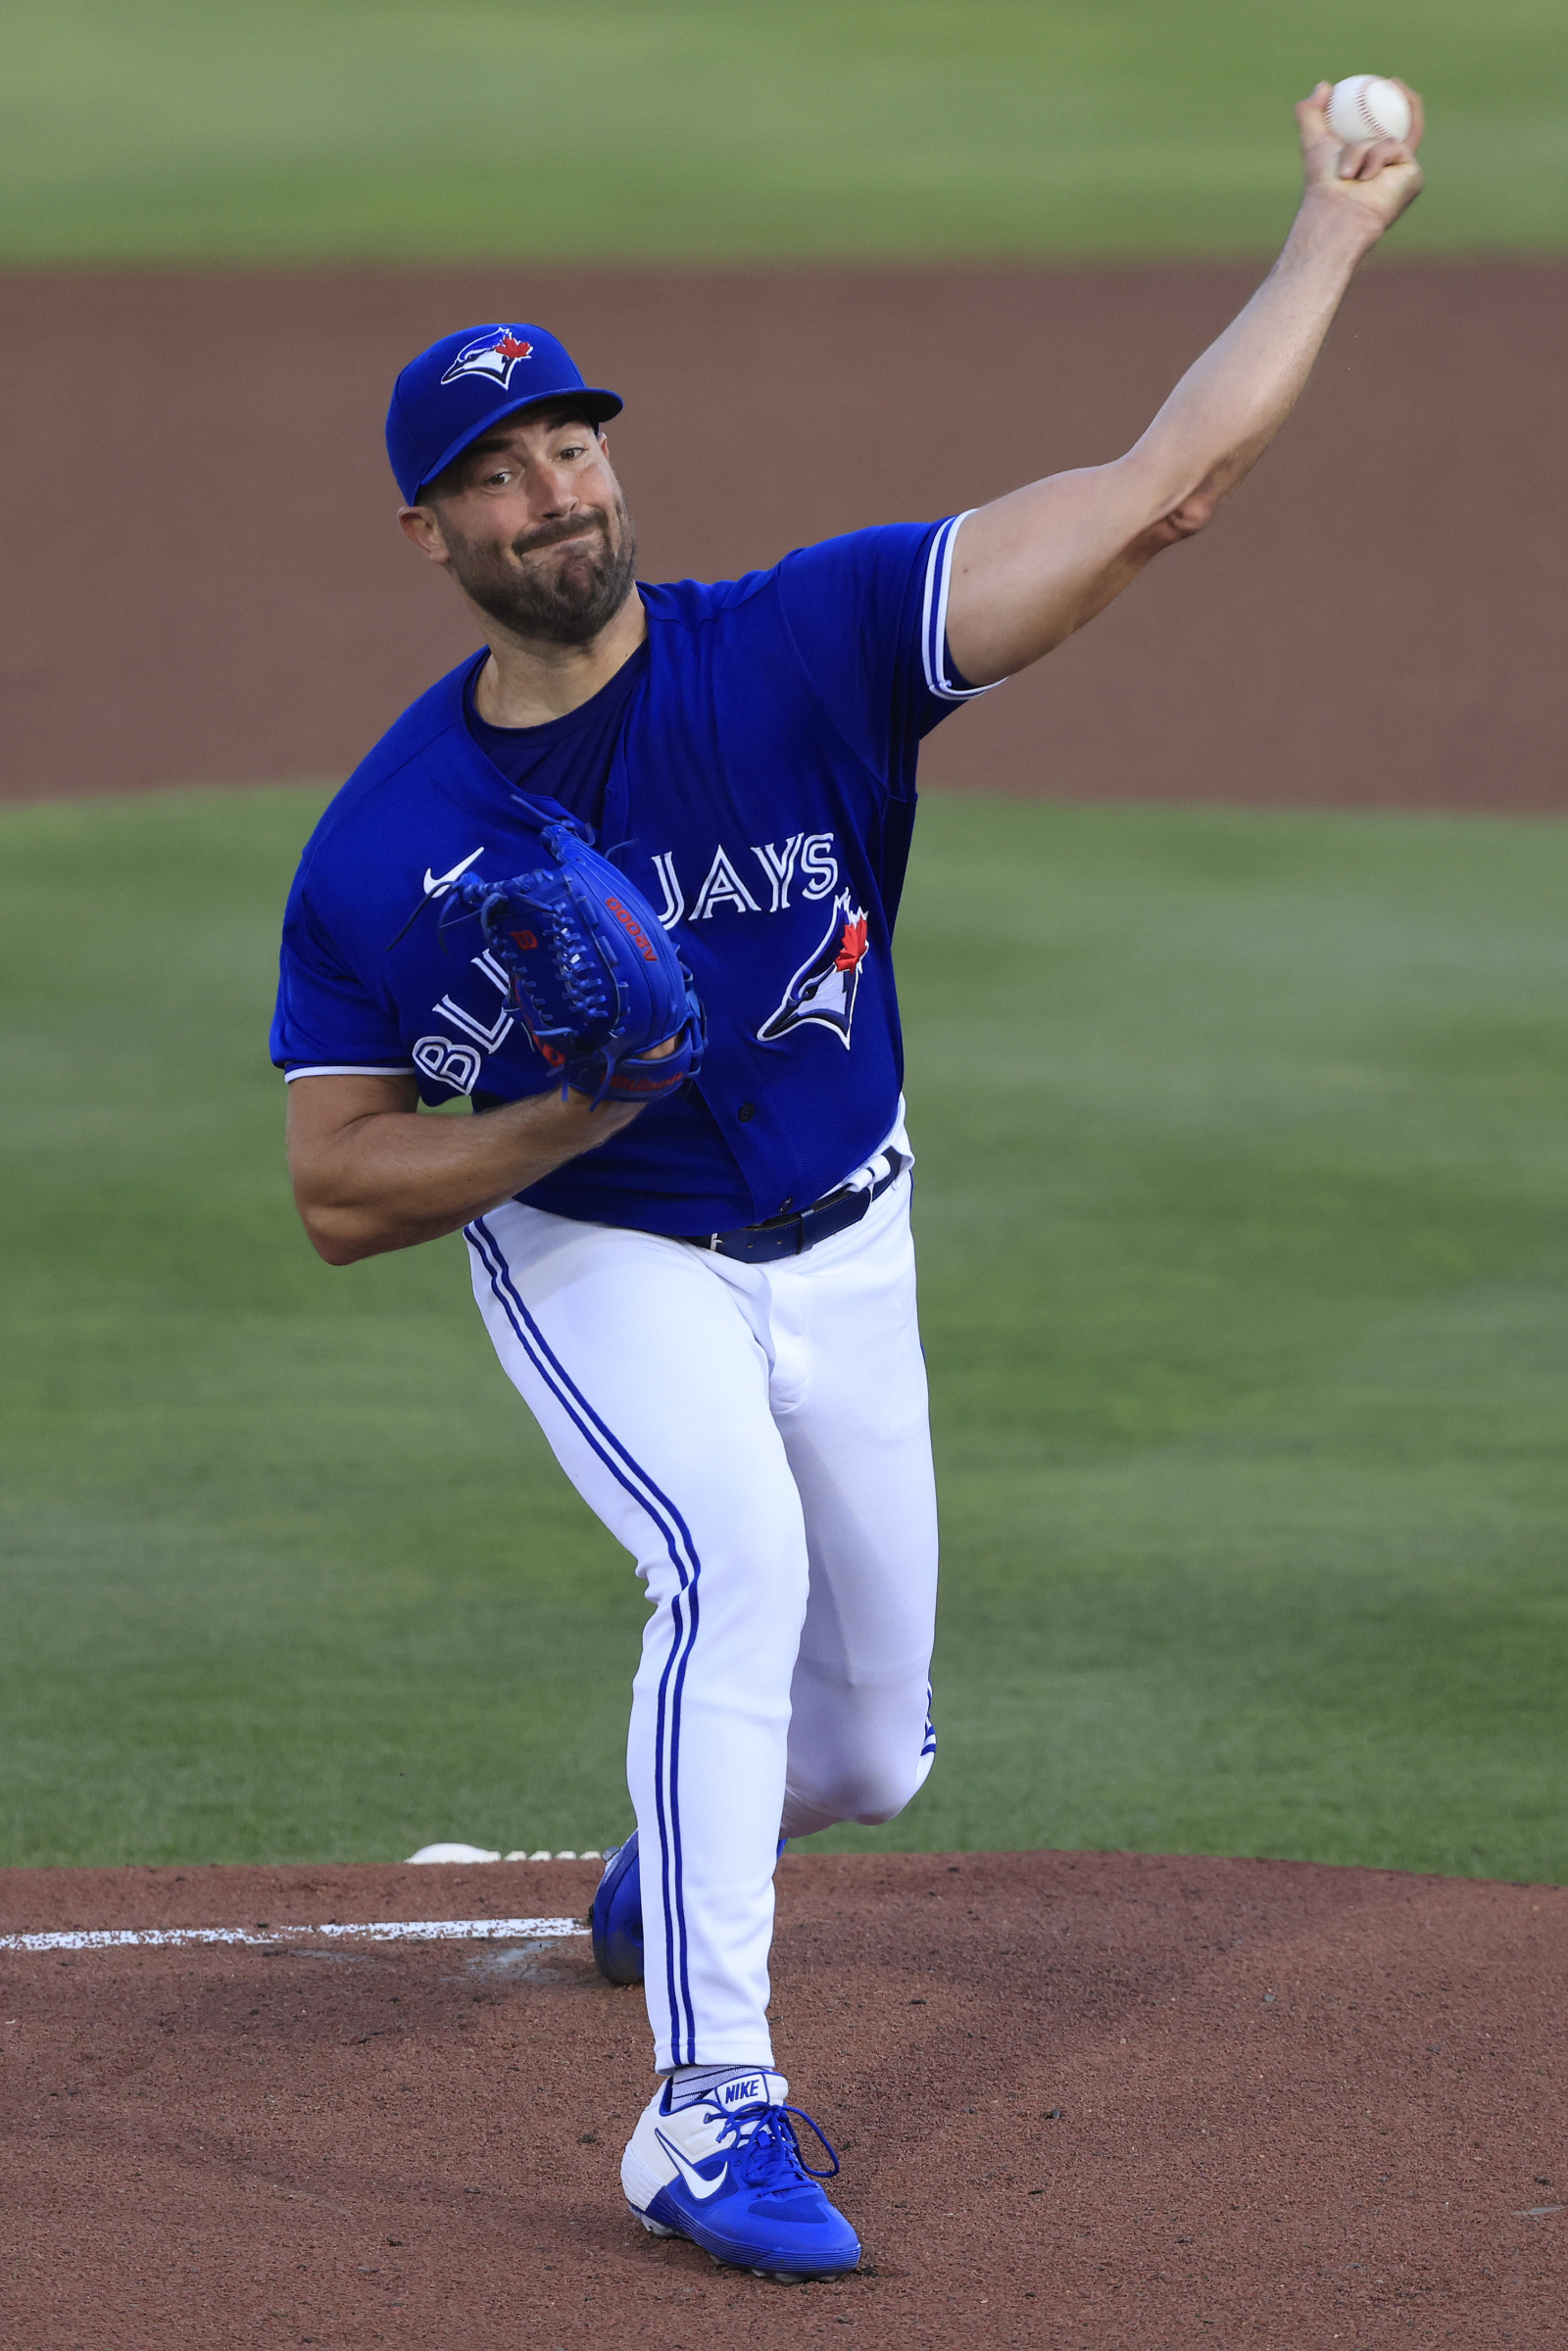 The Toronto Blue Jays tapped into Robbie Ray at right time